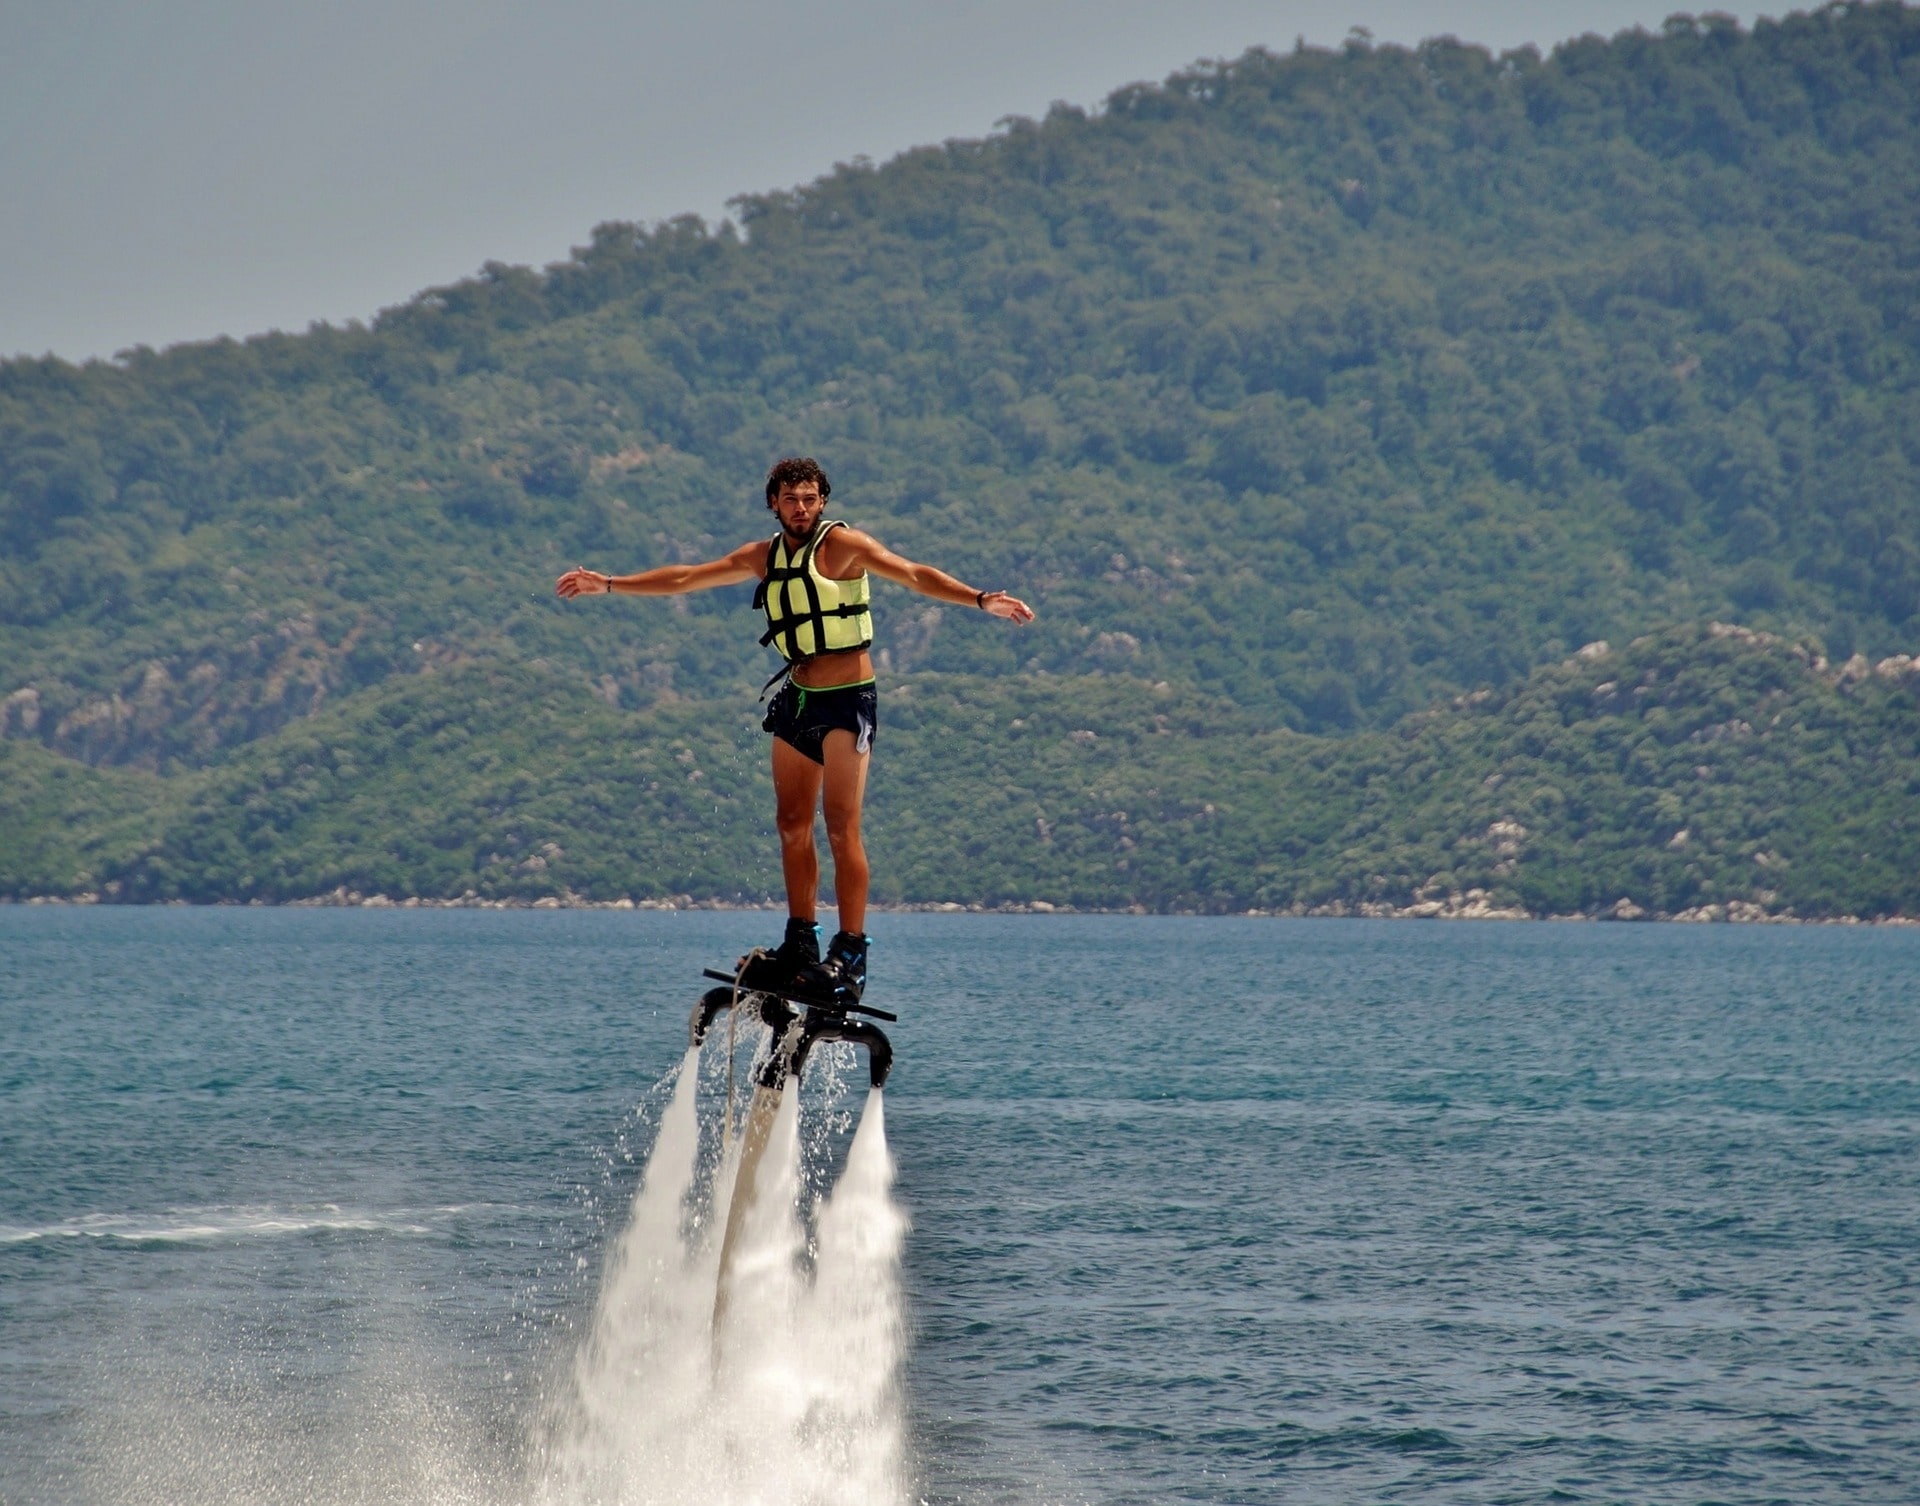 Flyboarding Frenchman crosses the English Channel